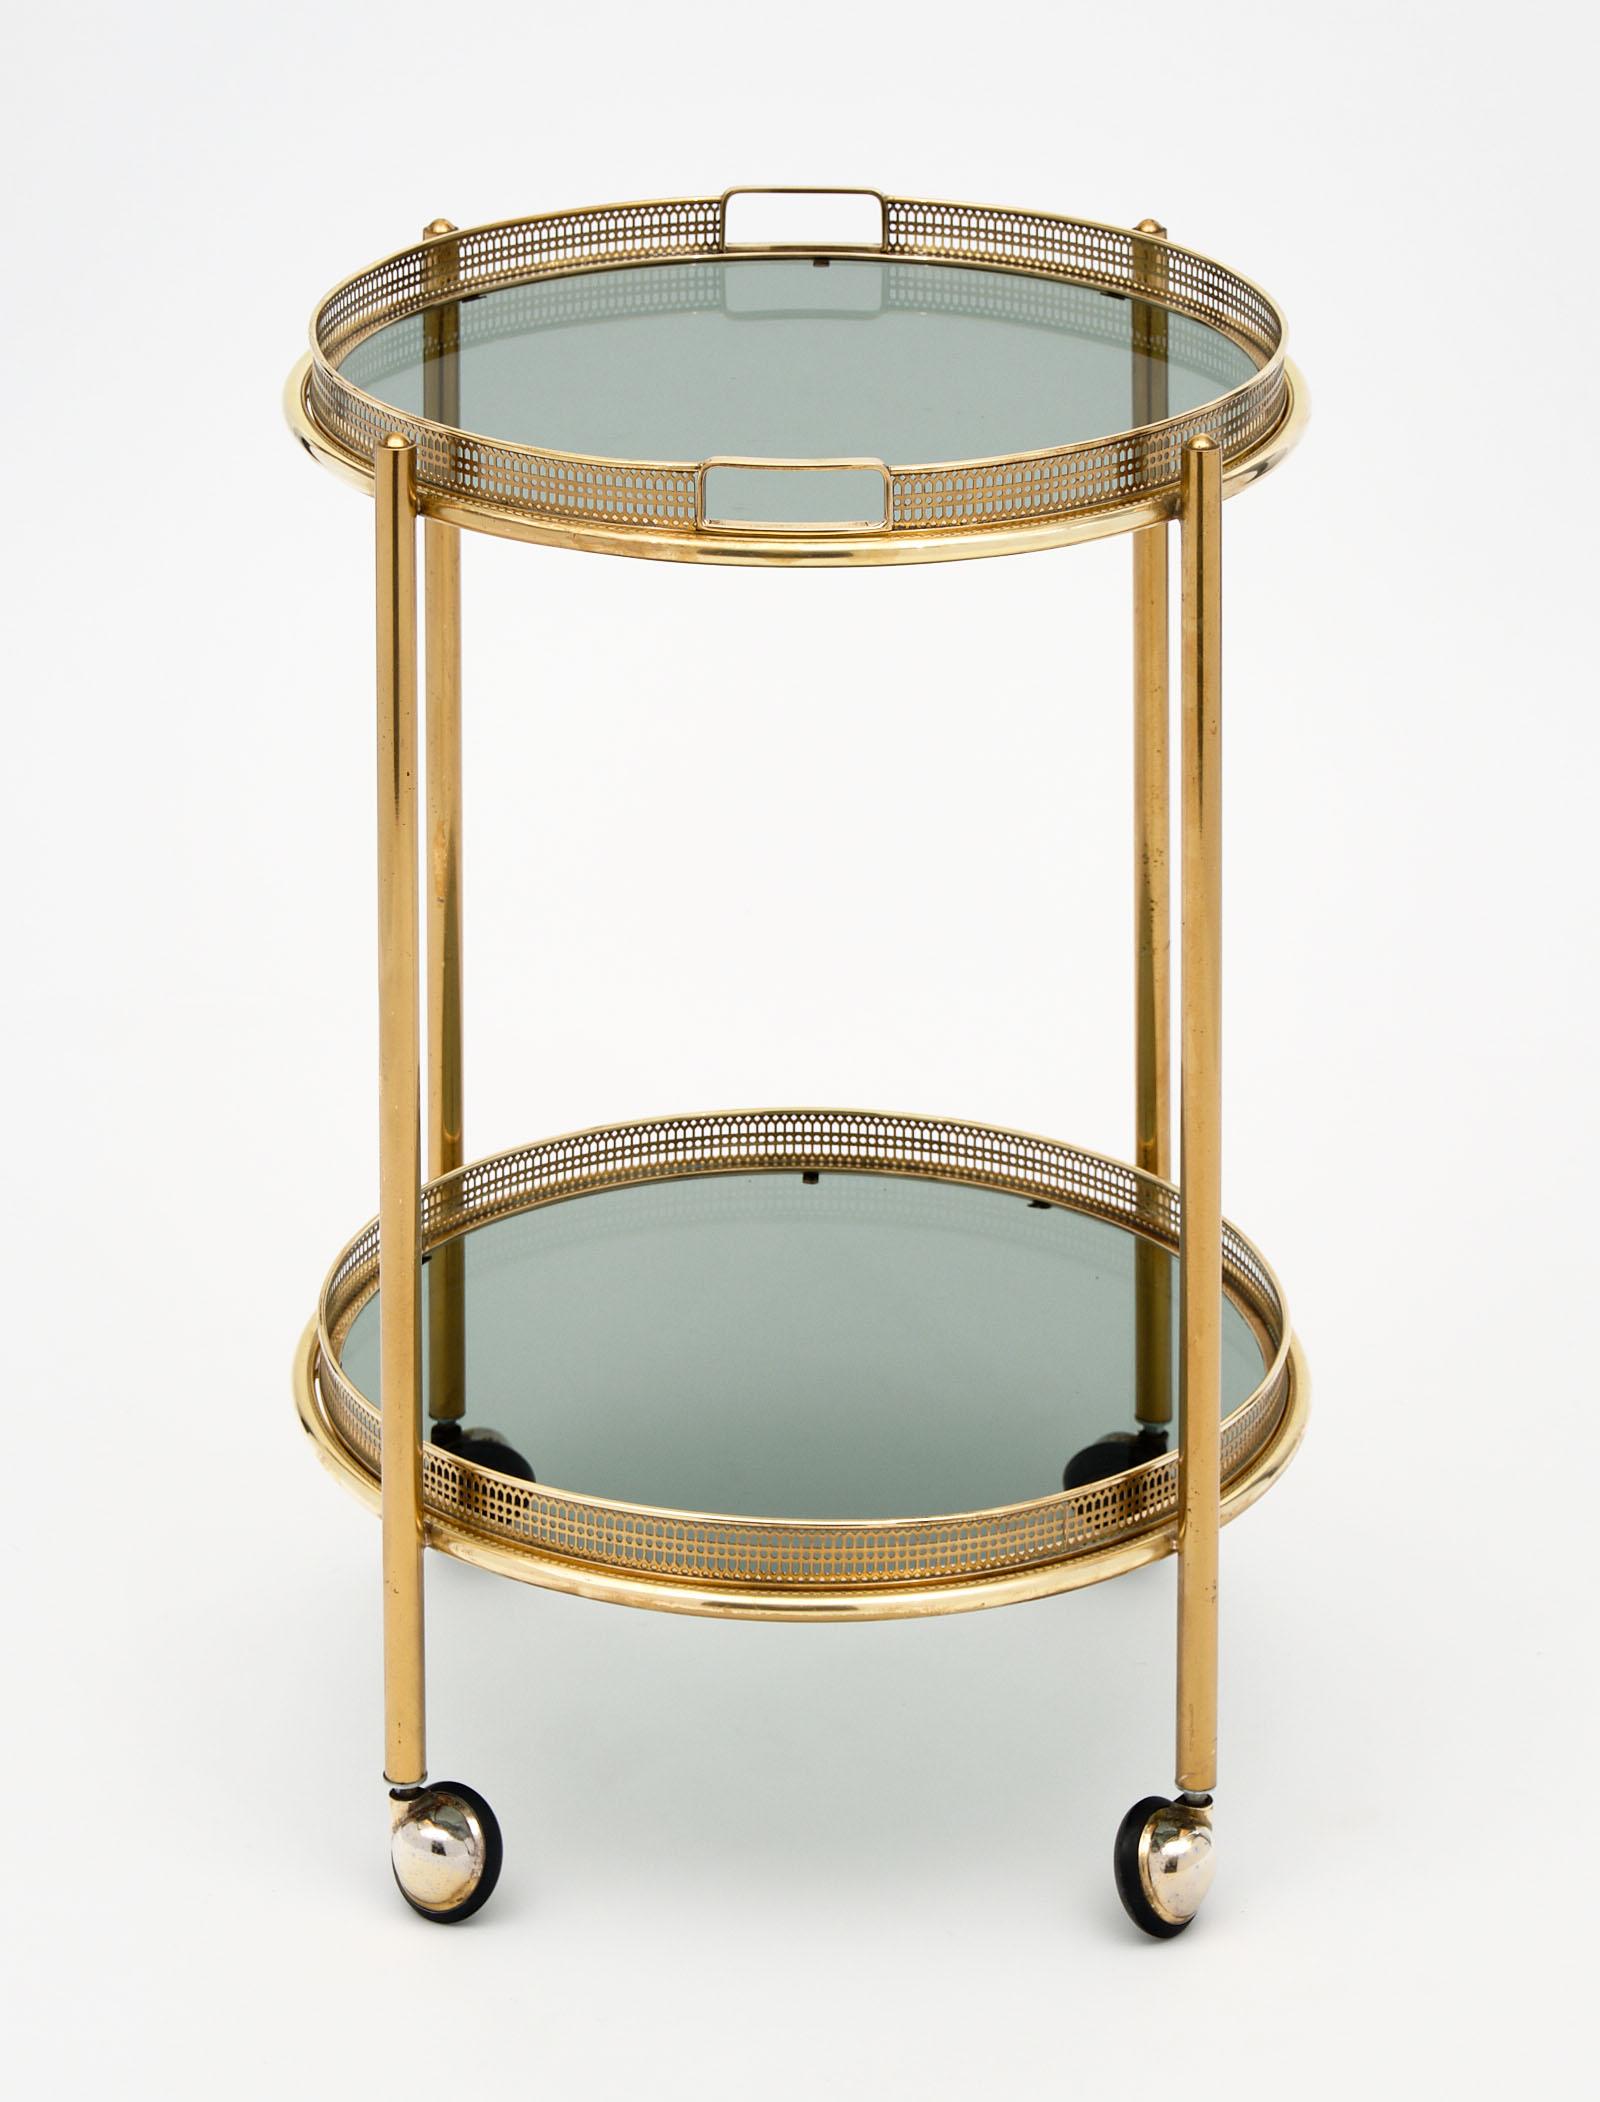 Vintage French brass bar cart with tray. We love the smoked glass and detachable top tray. The brass structure is quite sturdy and in excellent vintage condition.